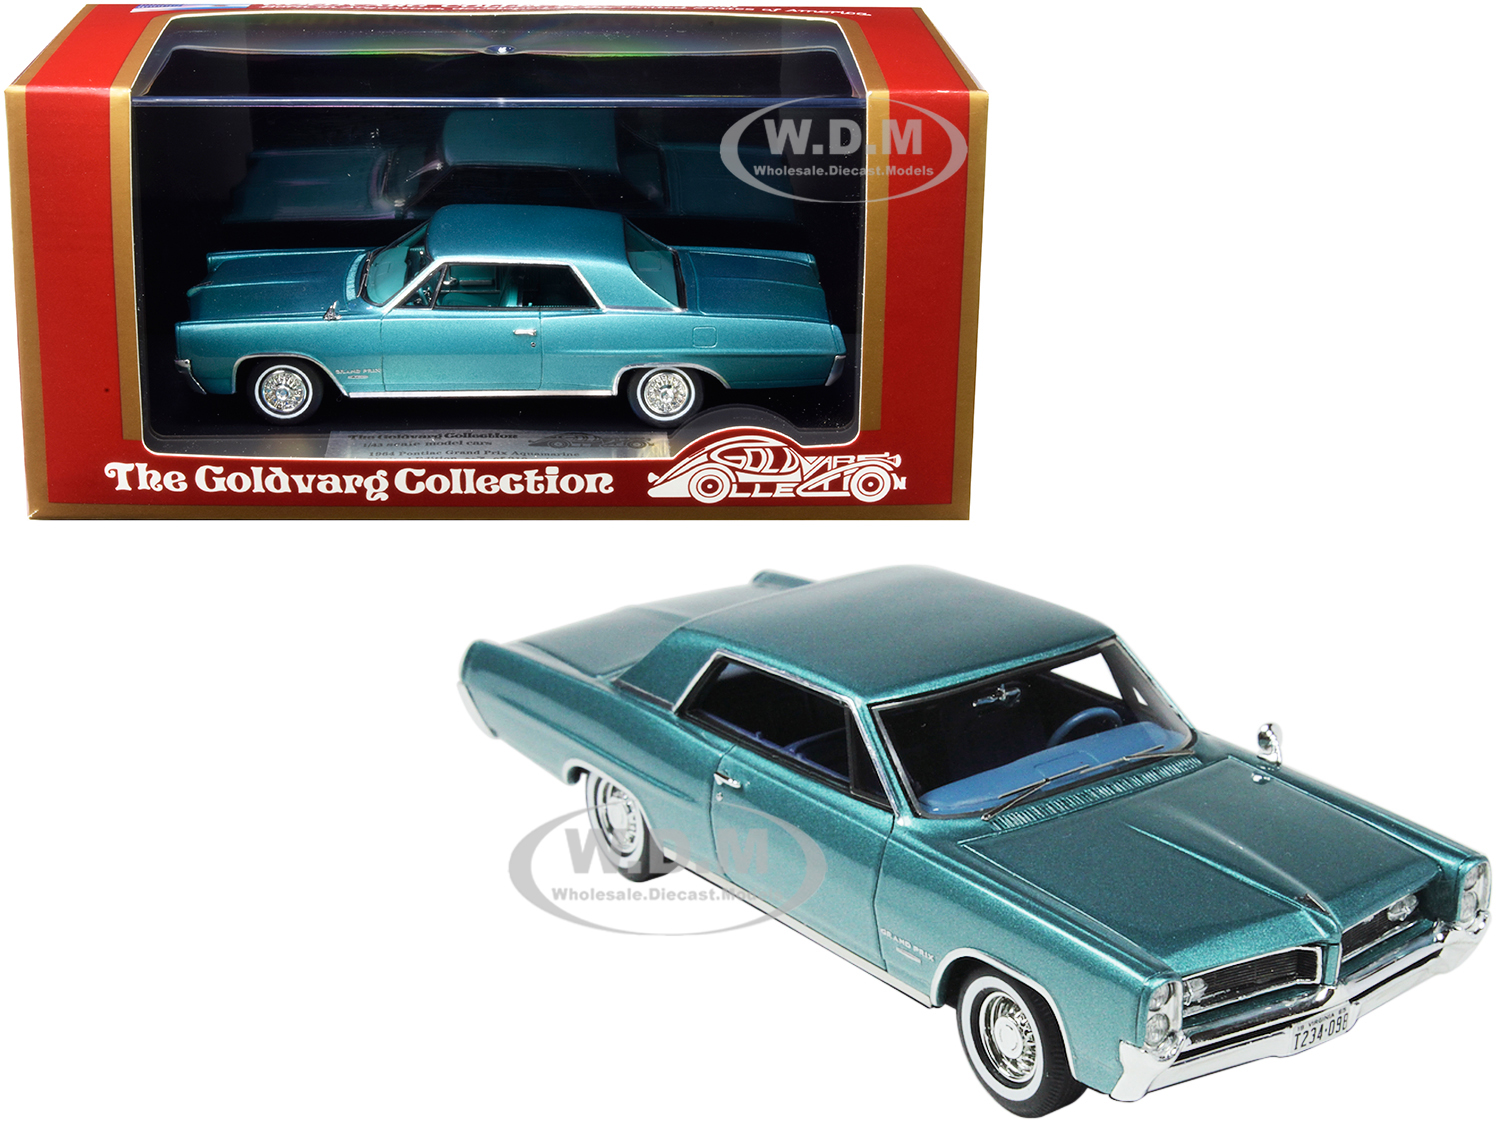 1964 Pontiac Grand Prix Aquamarine Metallic Limited Edition To 210 Pieces Worldwide 1/43 Model Car By Goldvarg Collection